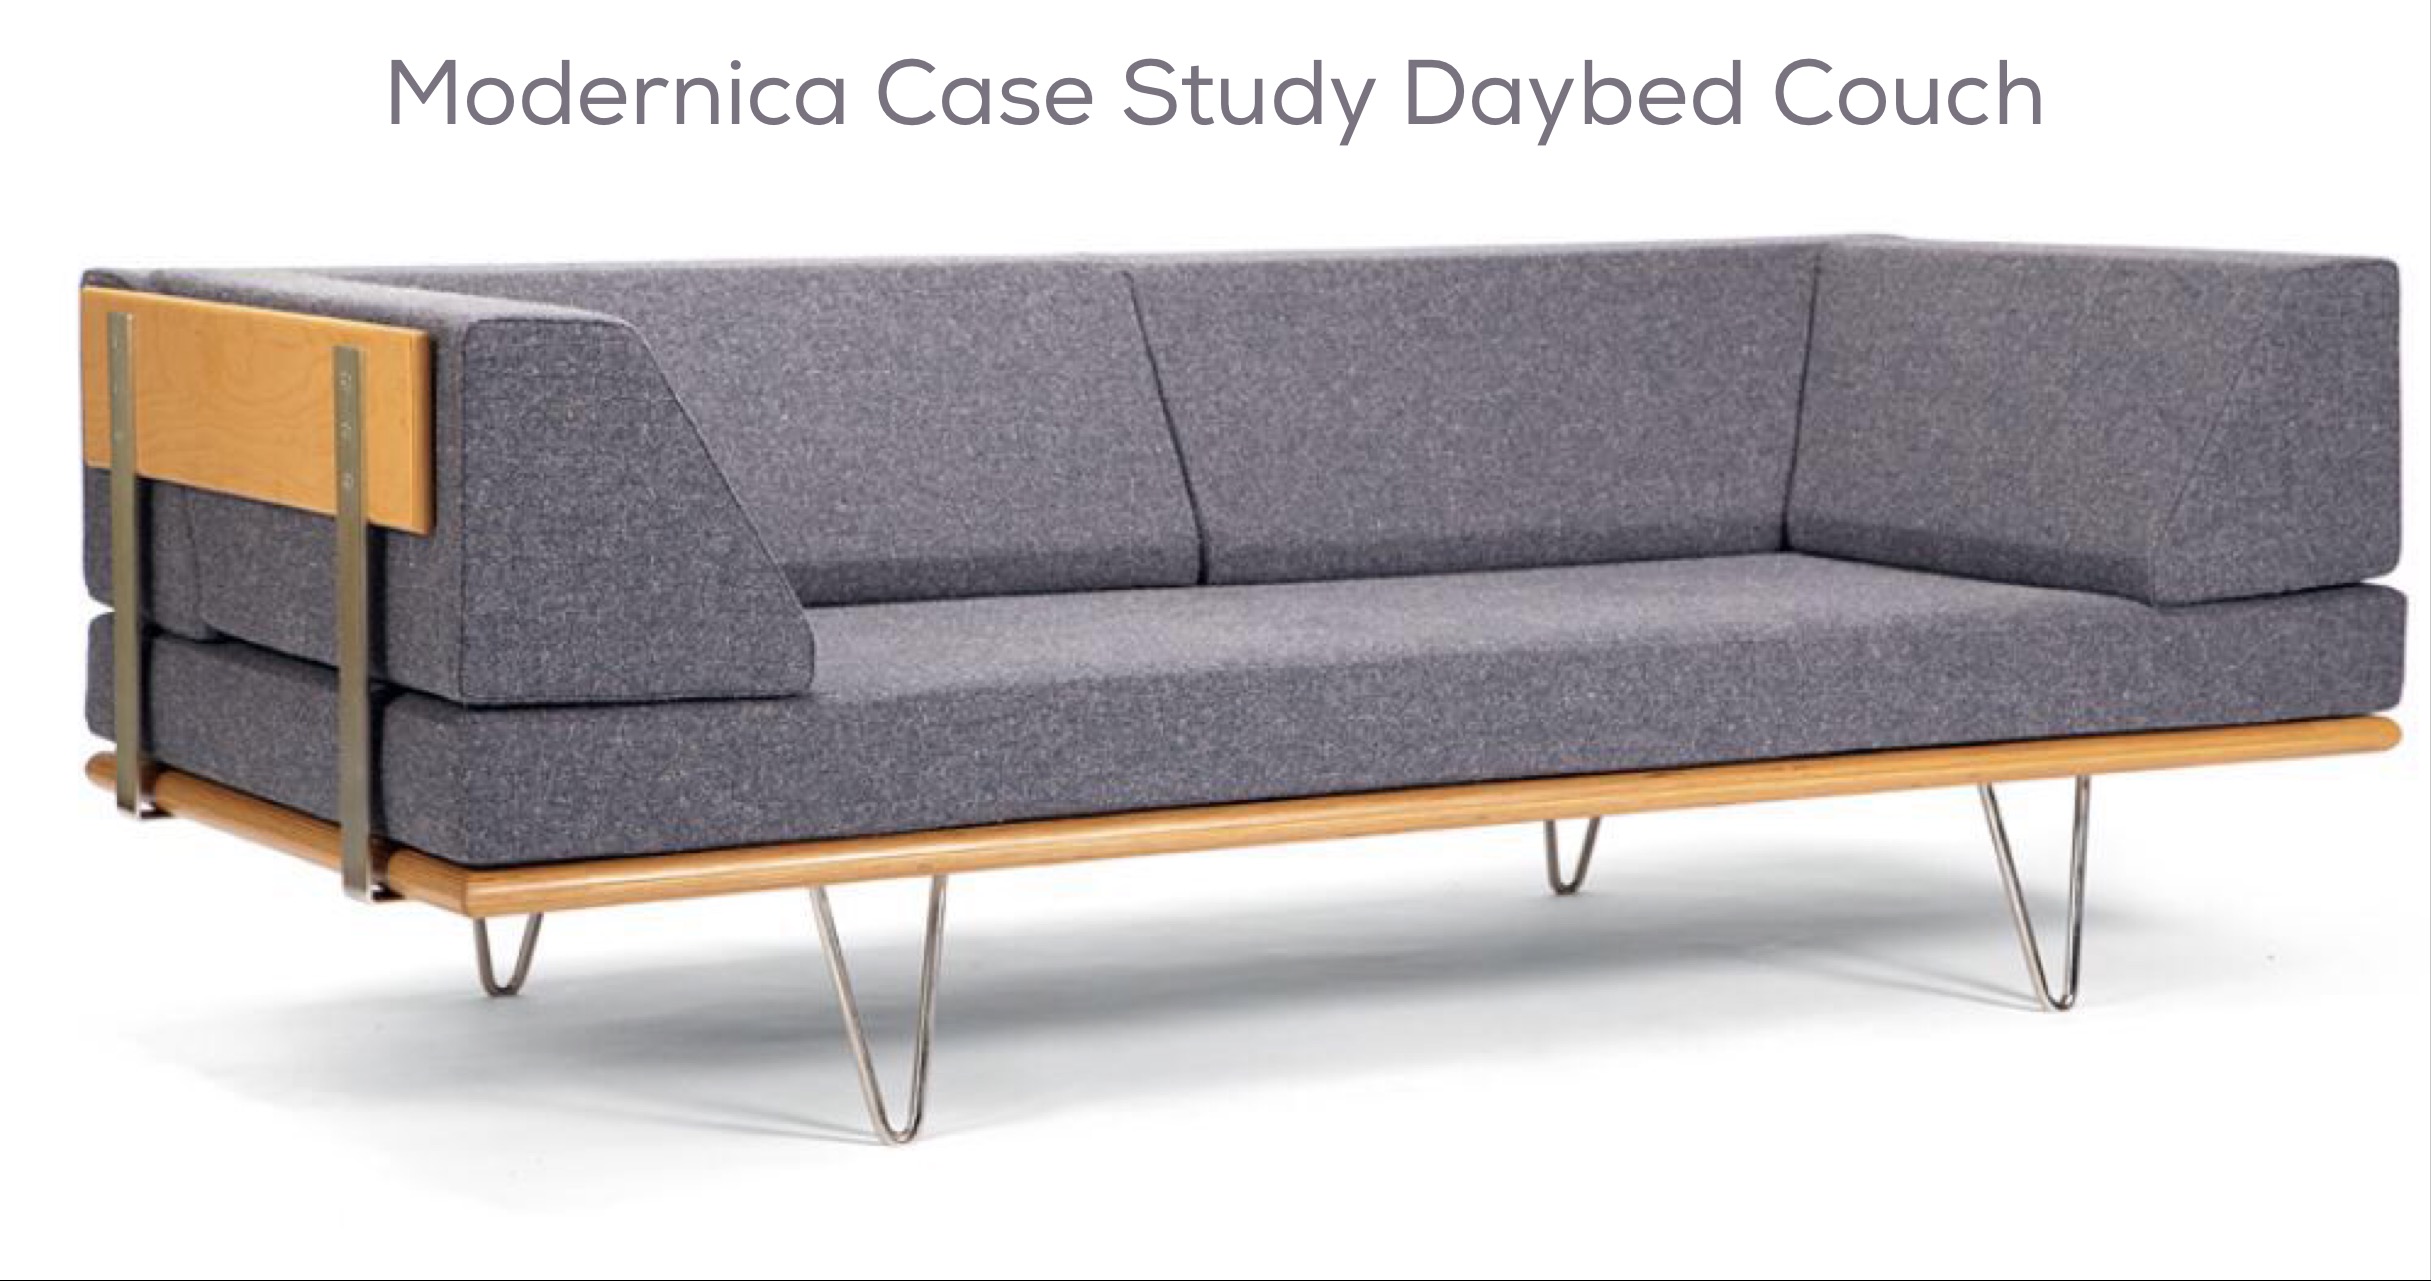 Modernica Case Study Daybed Couch